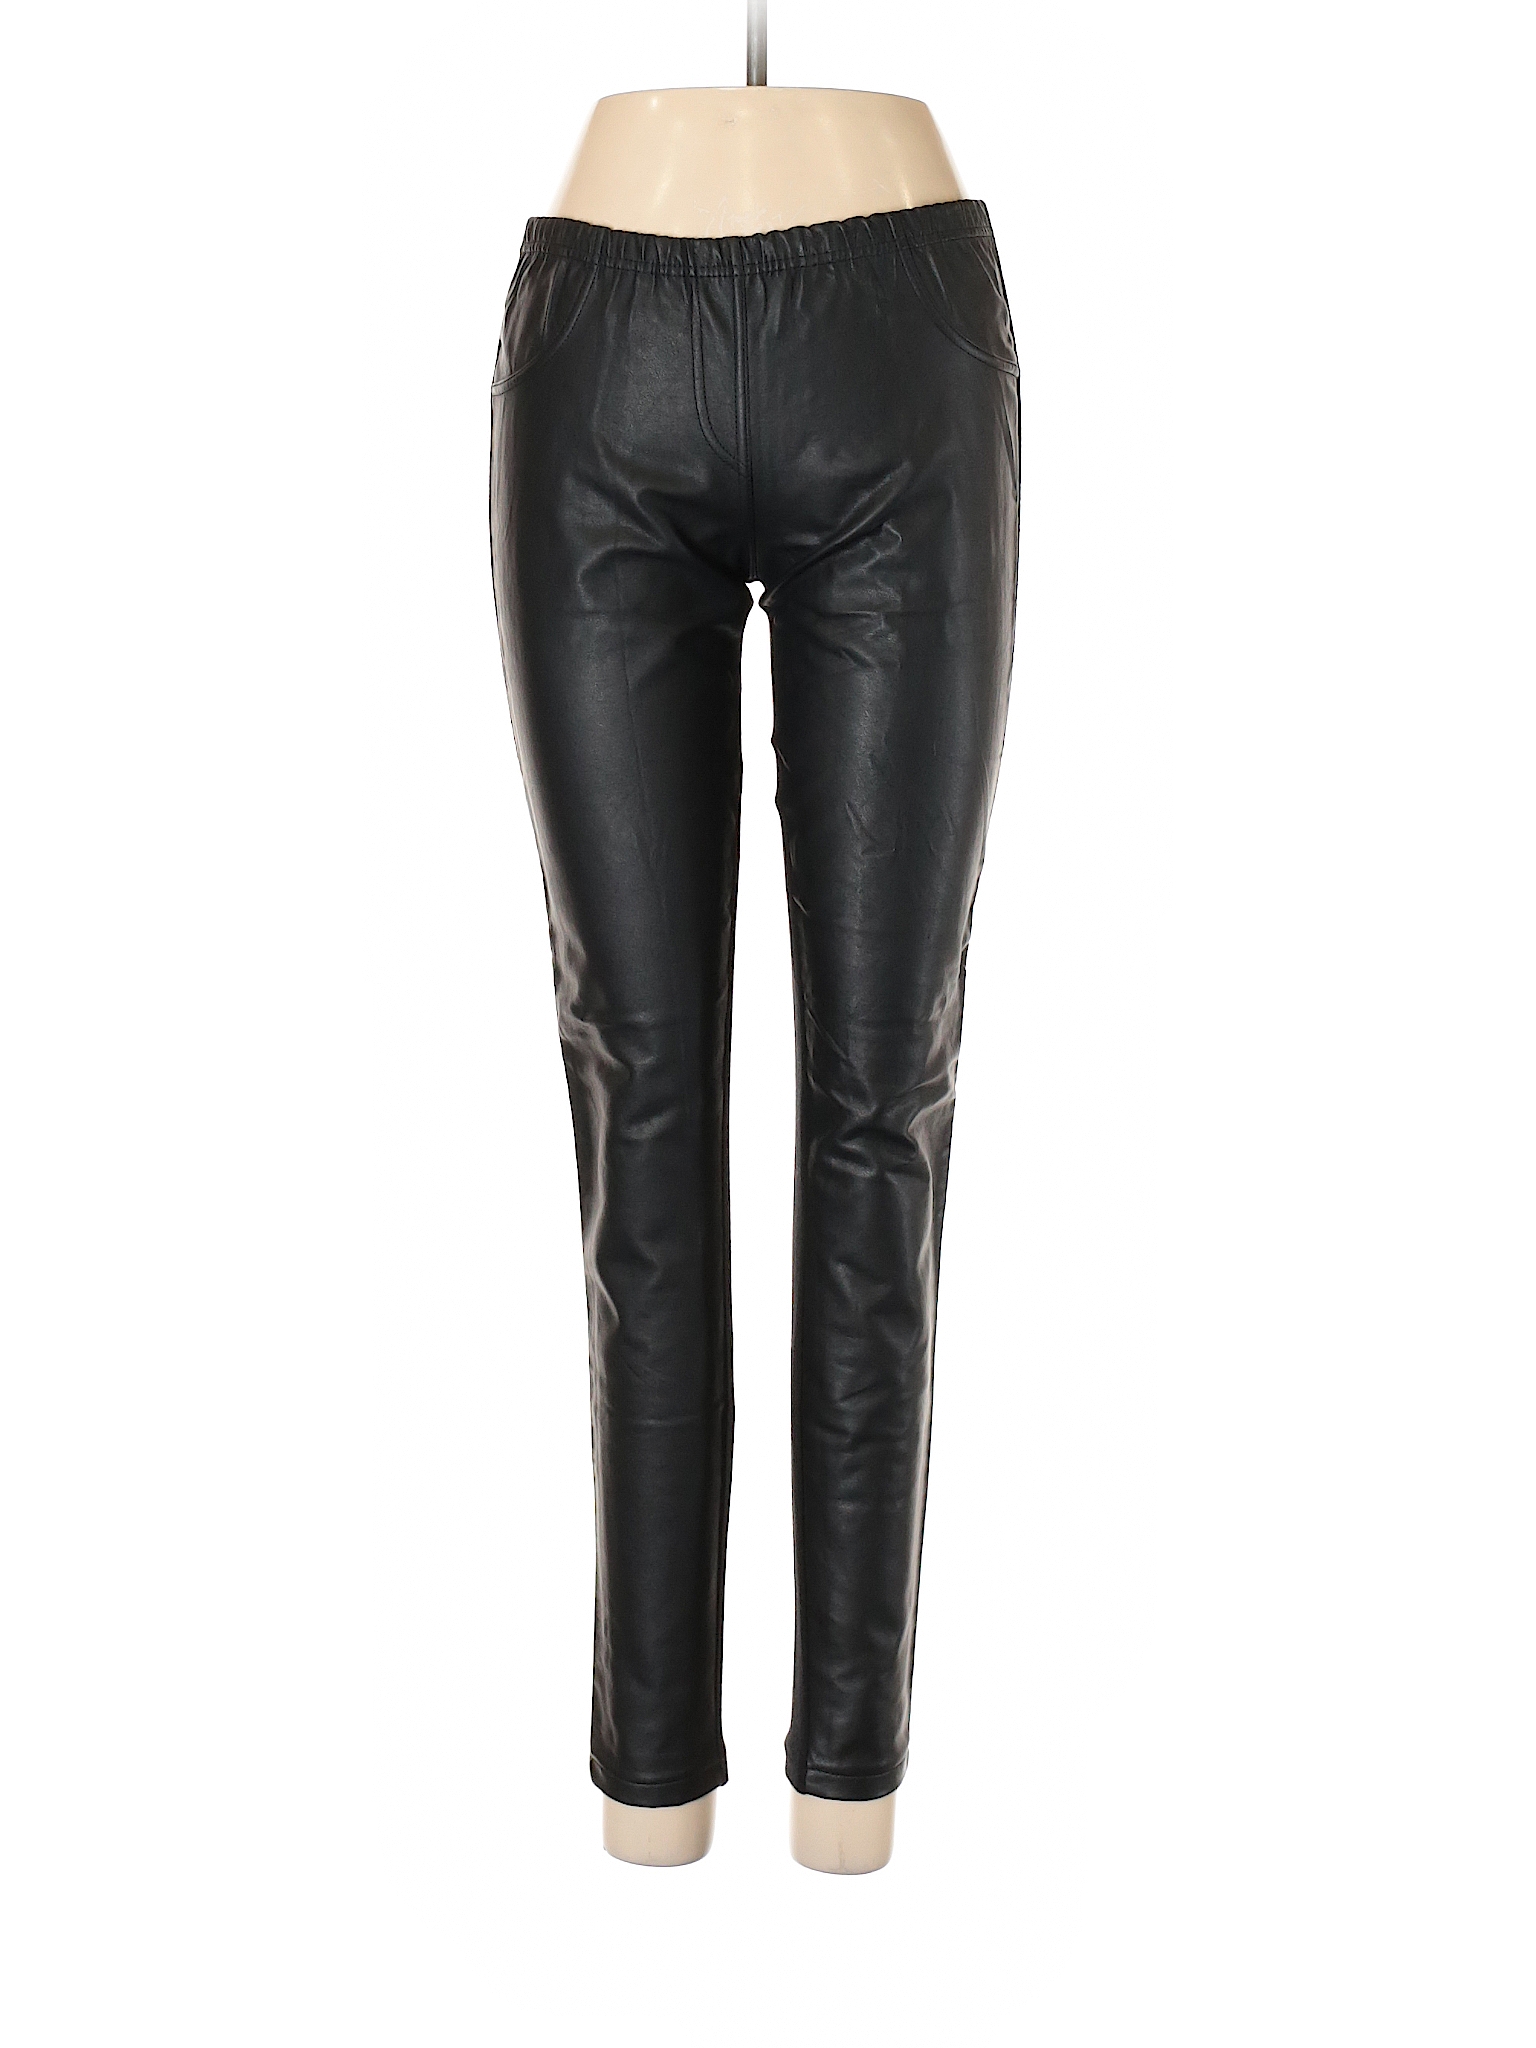 Calzedonia Solid Black Faux Leather Pants Size S - 75% off | thredUP